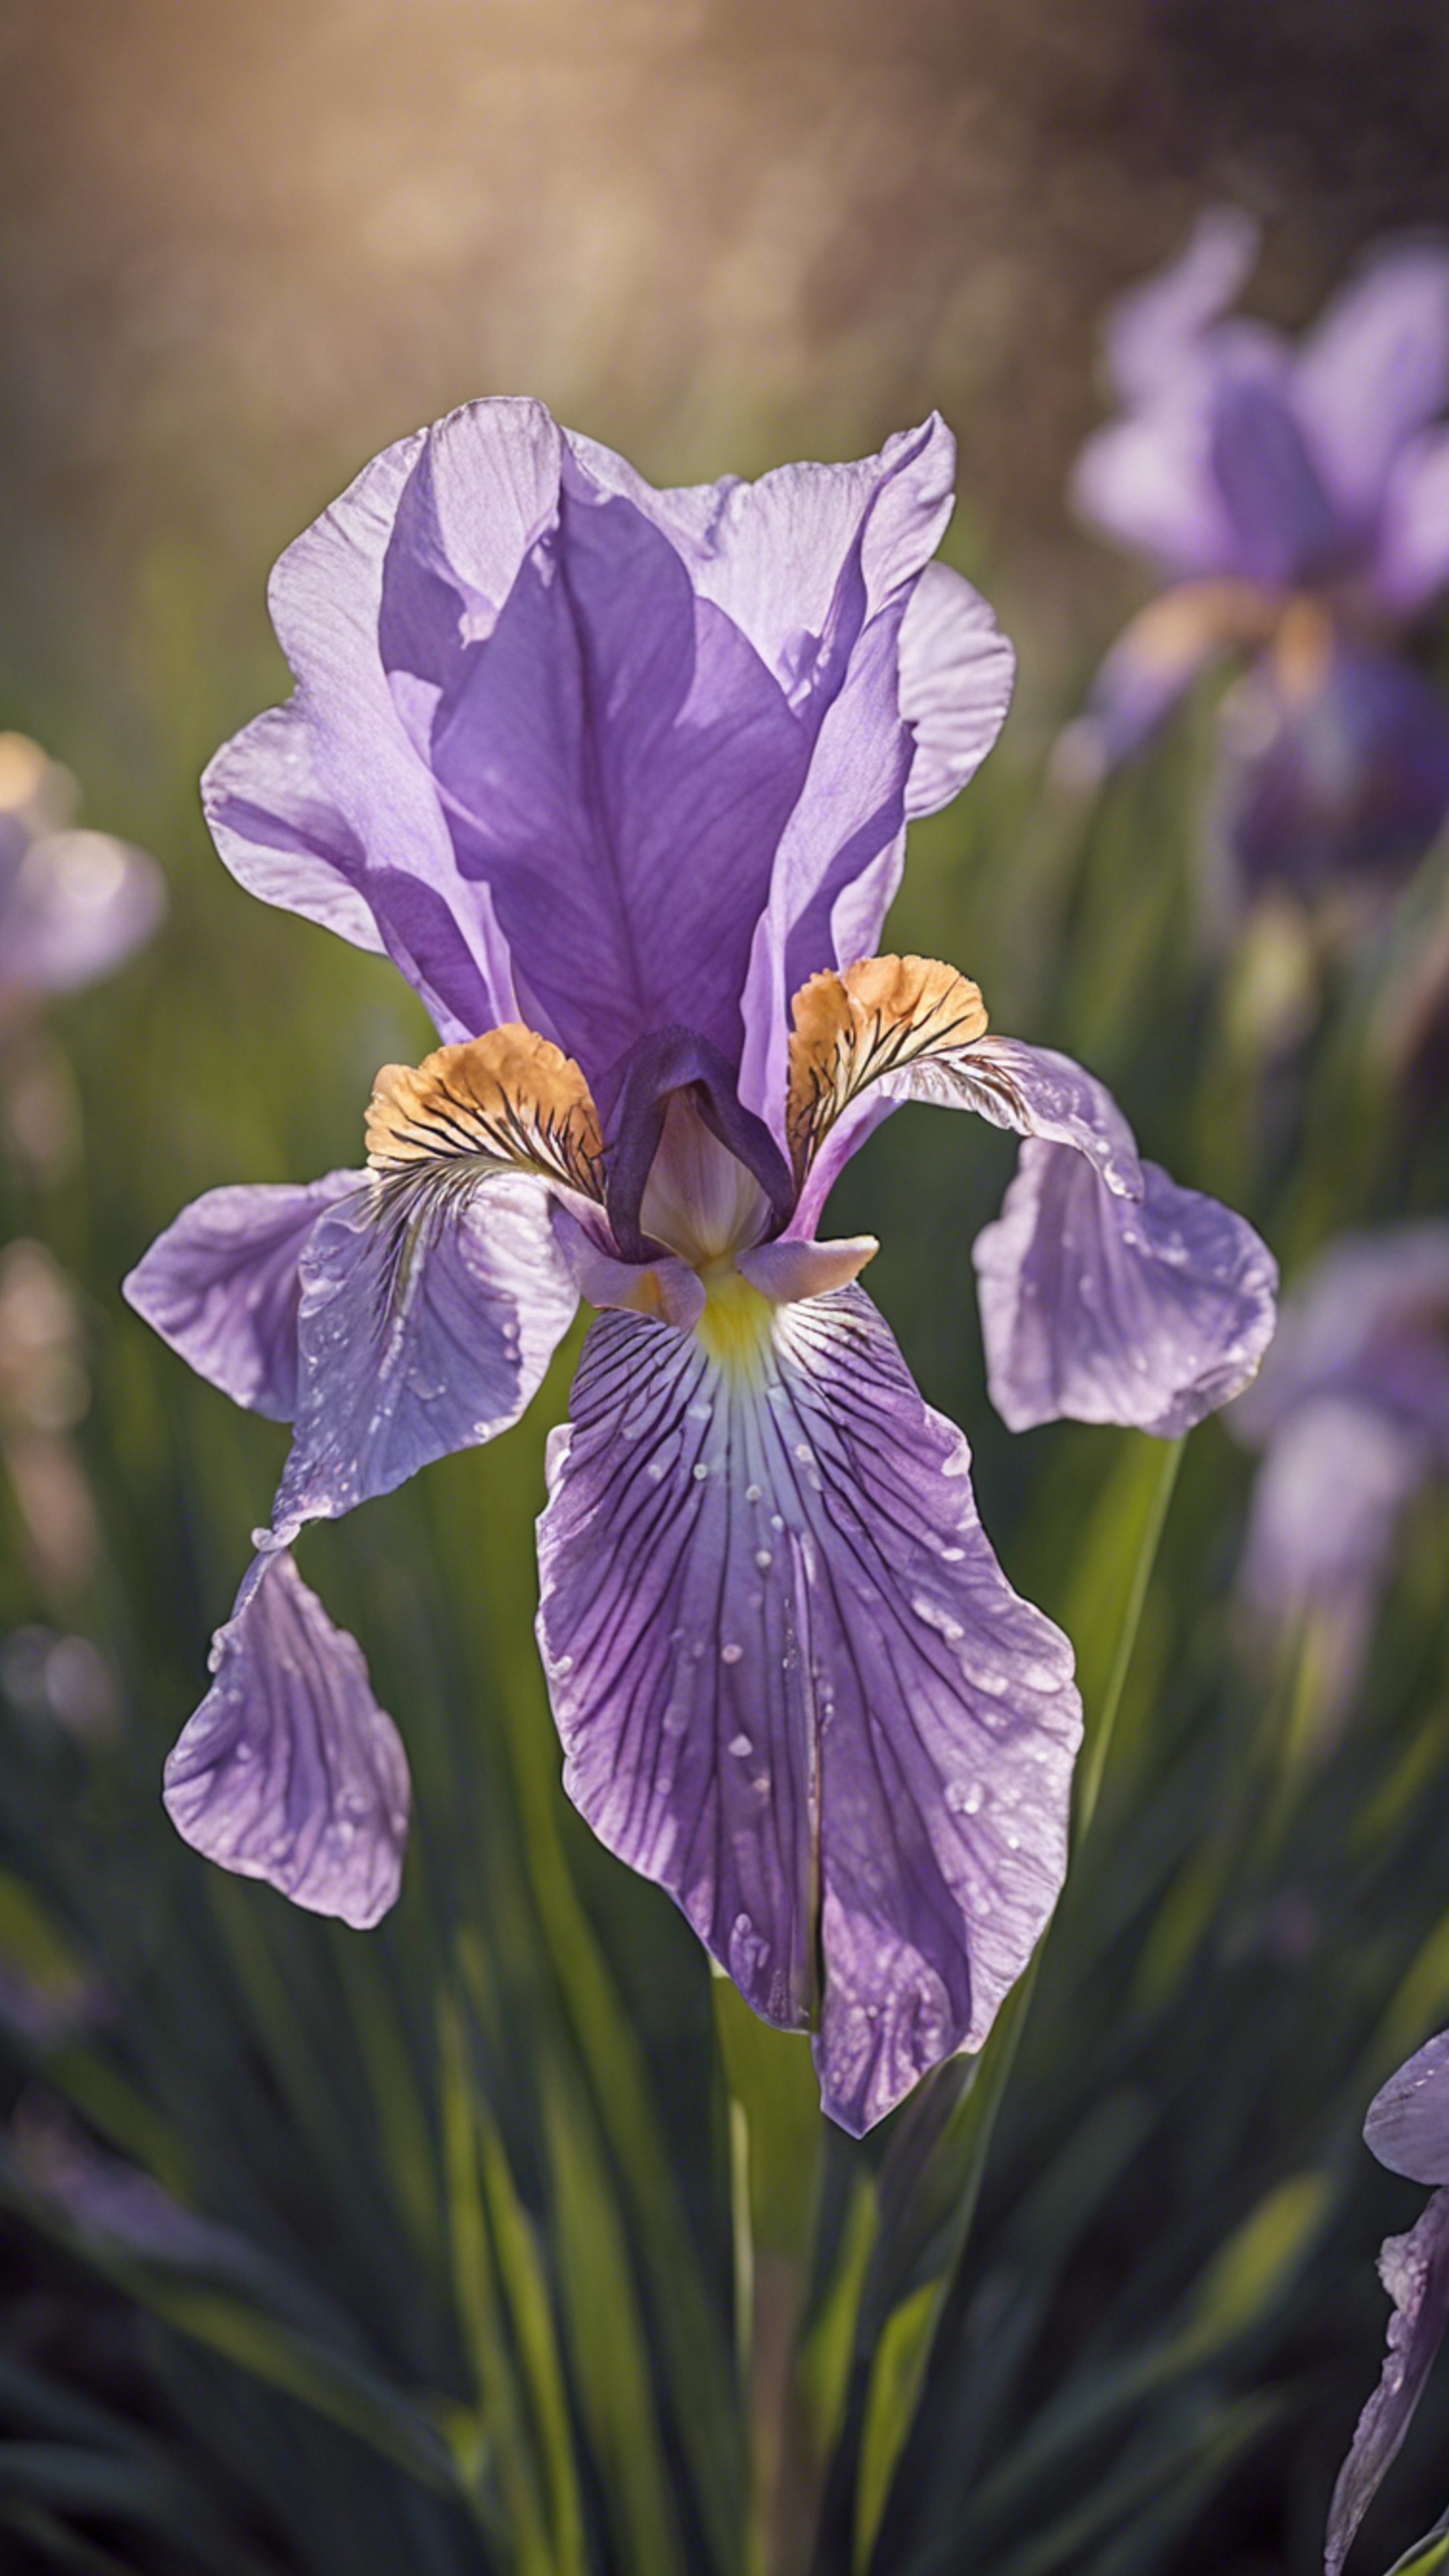 Light purple Siberian iris opening its petals to welcome spring.壁紙[7b0308764d2347ad82a0]